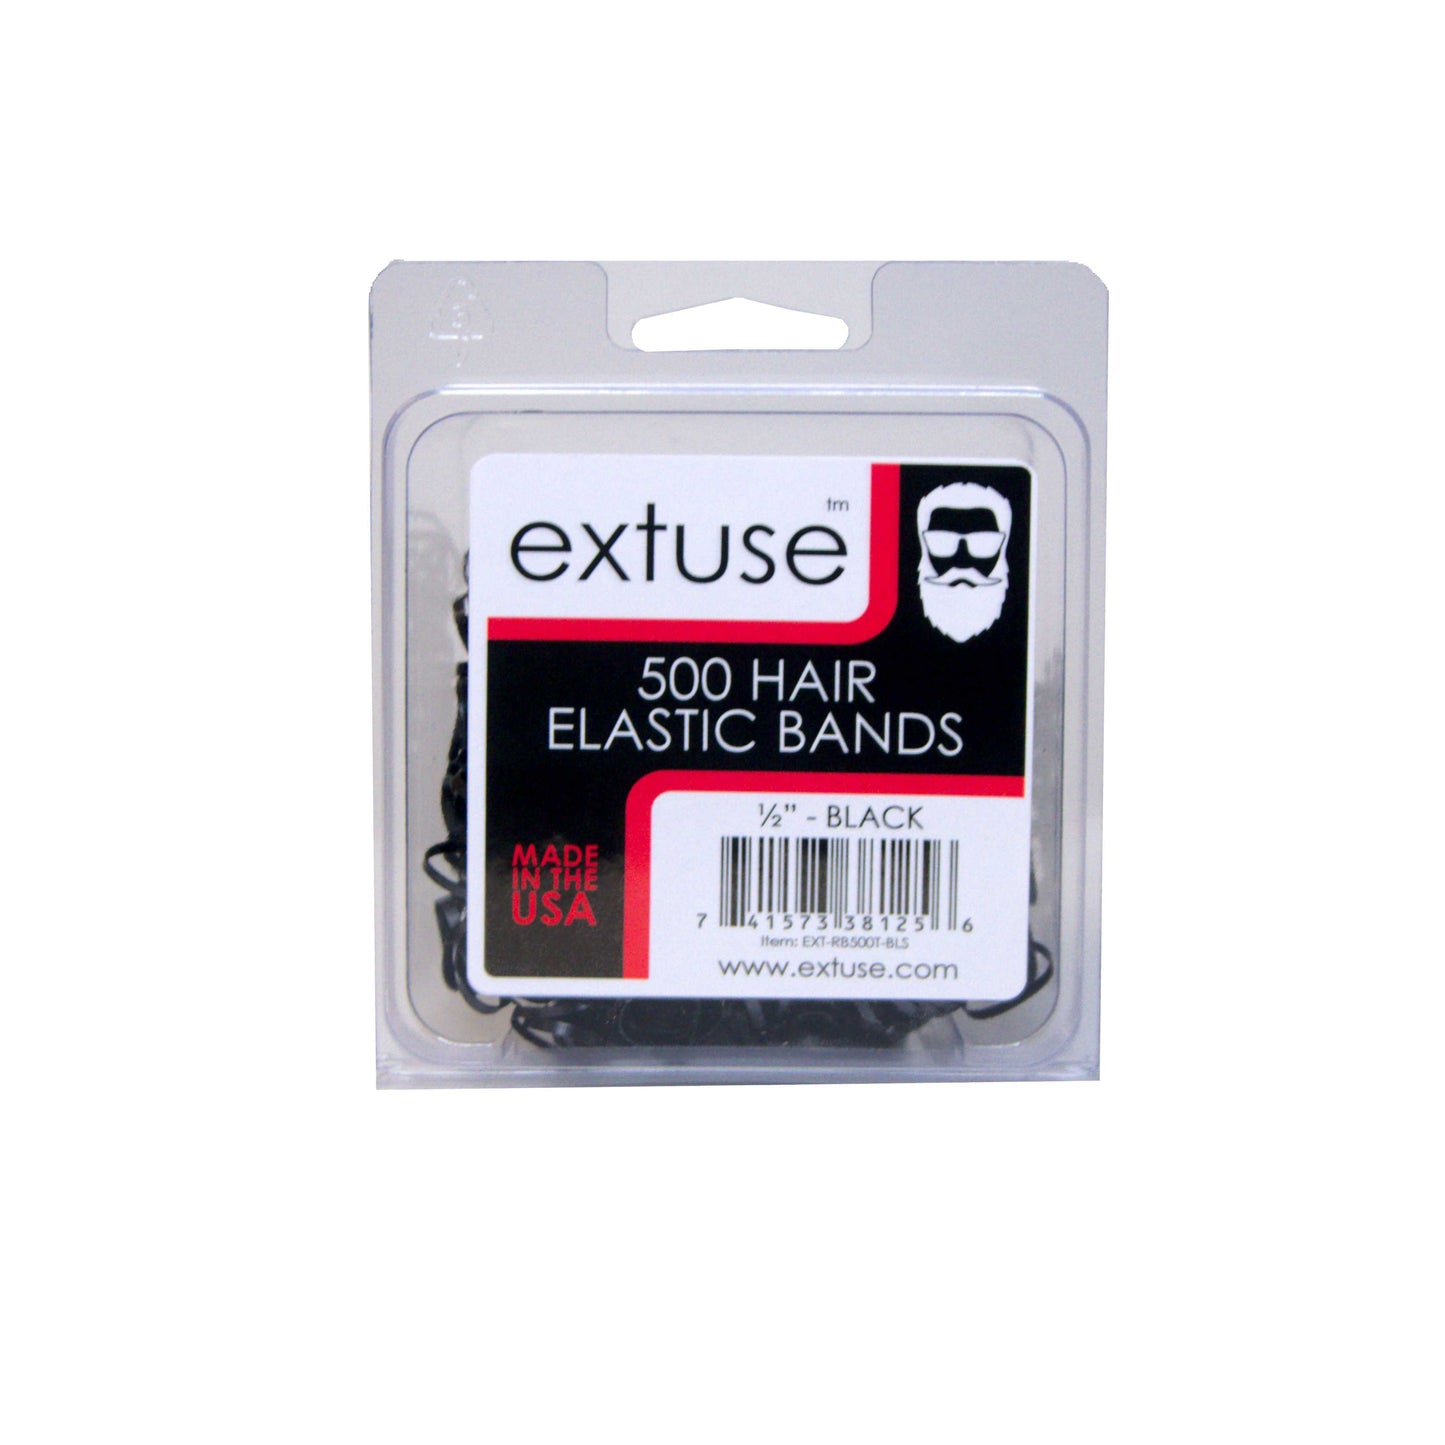 Extuse | 1/2in, Black, Tangle Free Elastic Pony Tail Holders | Made in USA, Ideal for Beards, Braids, Twists and Ponytails. For All People. Pain Free, Snag Free, Easy Off | 500 Pack